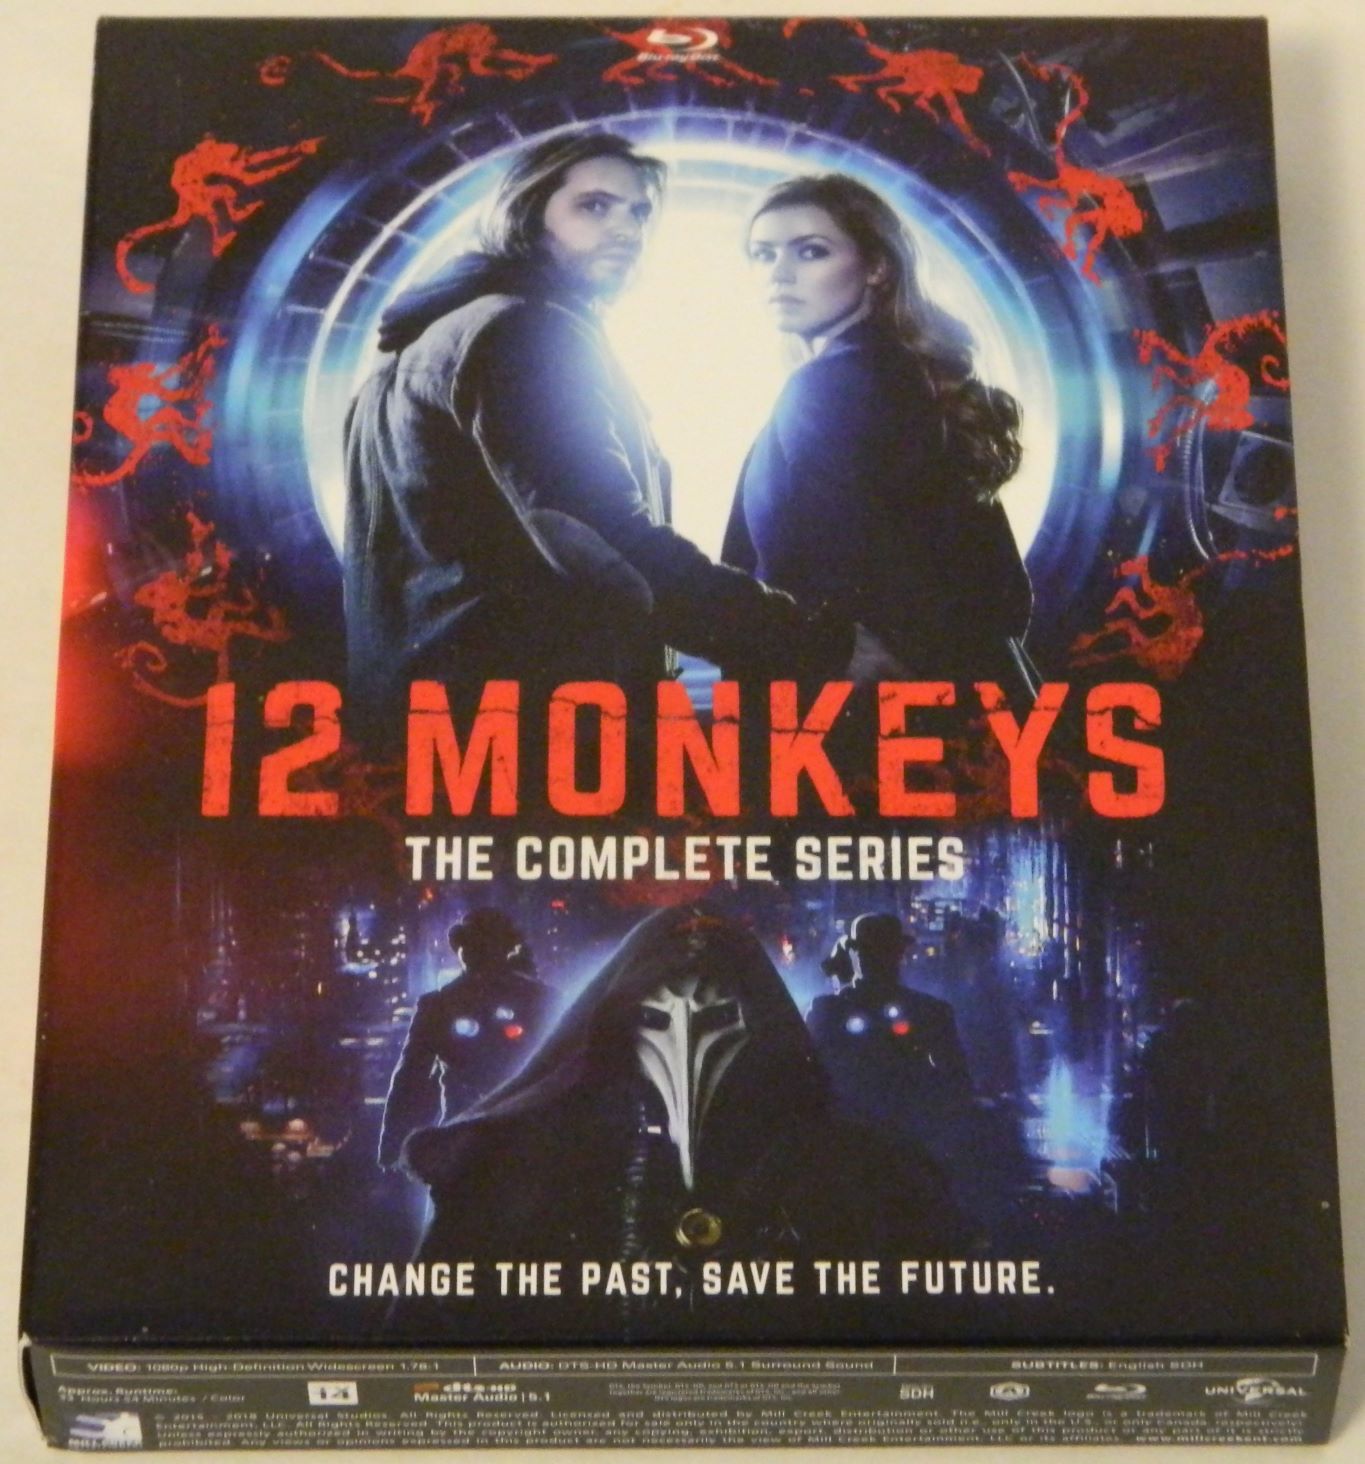 12 Monkeys The Complete Series Blu-ray